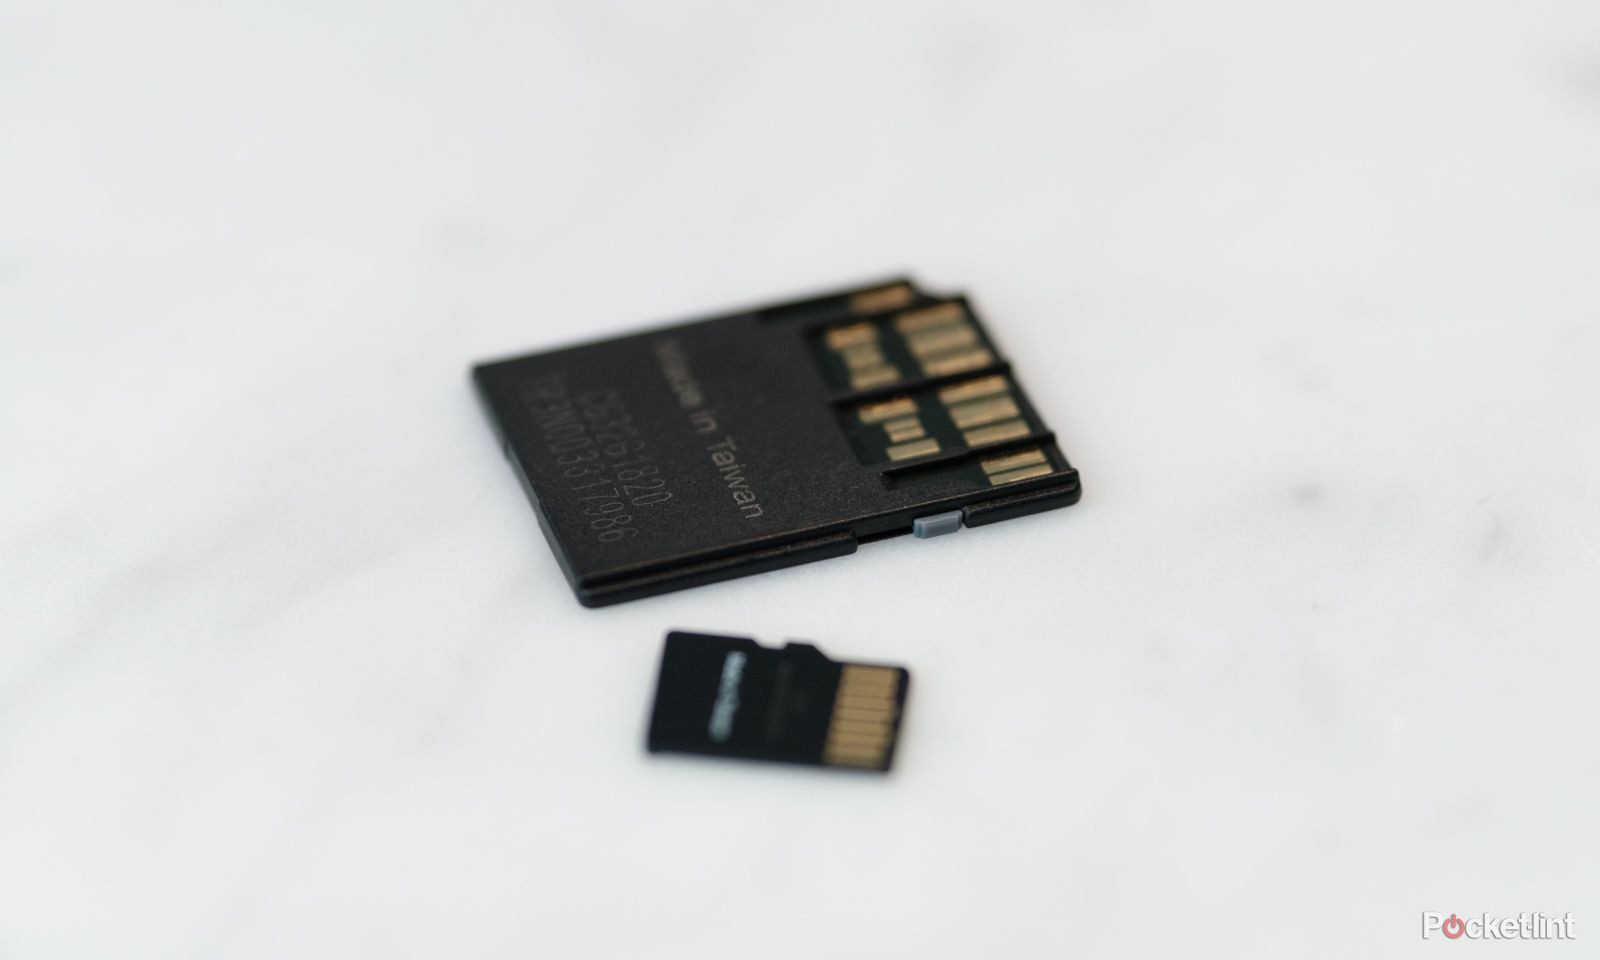 How to format an SD card or microSD card